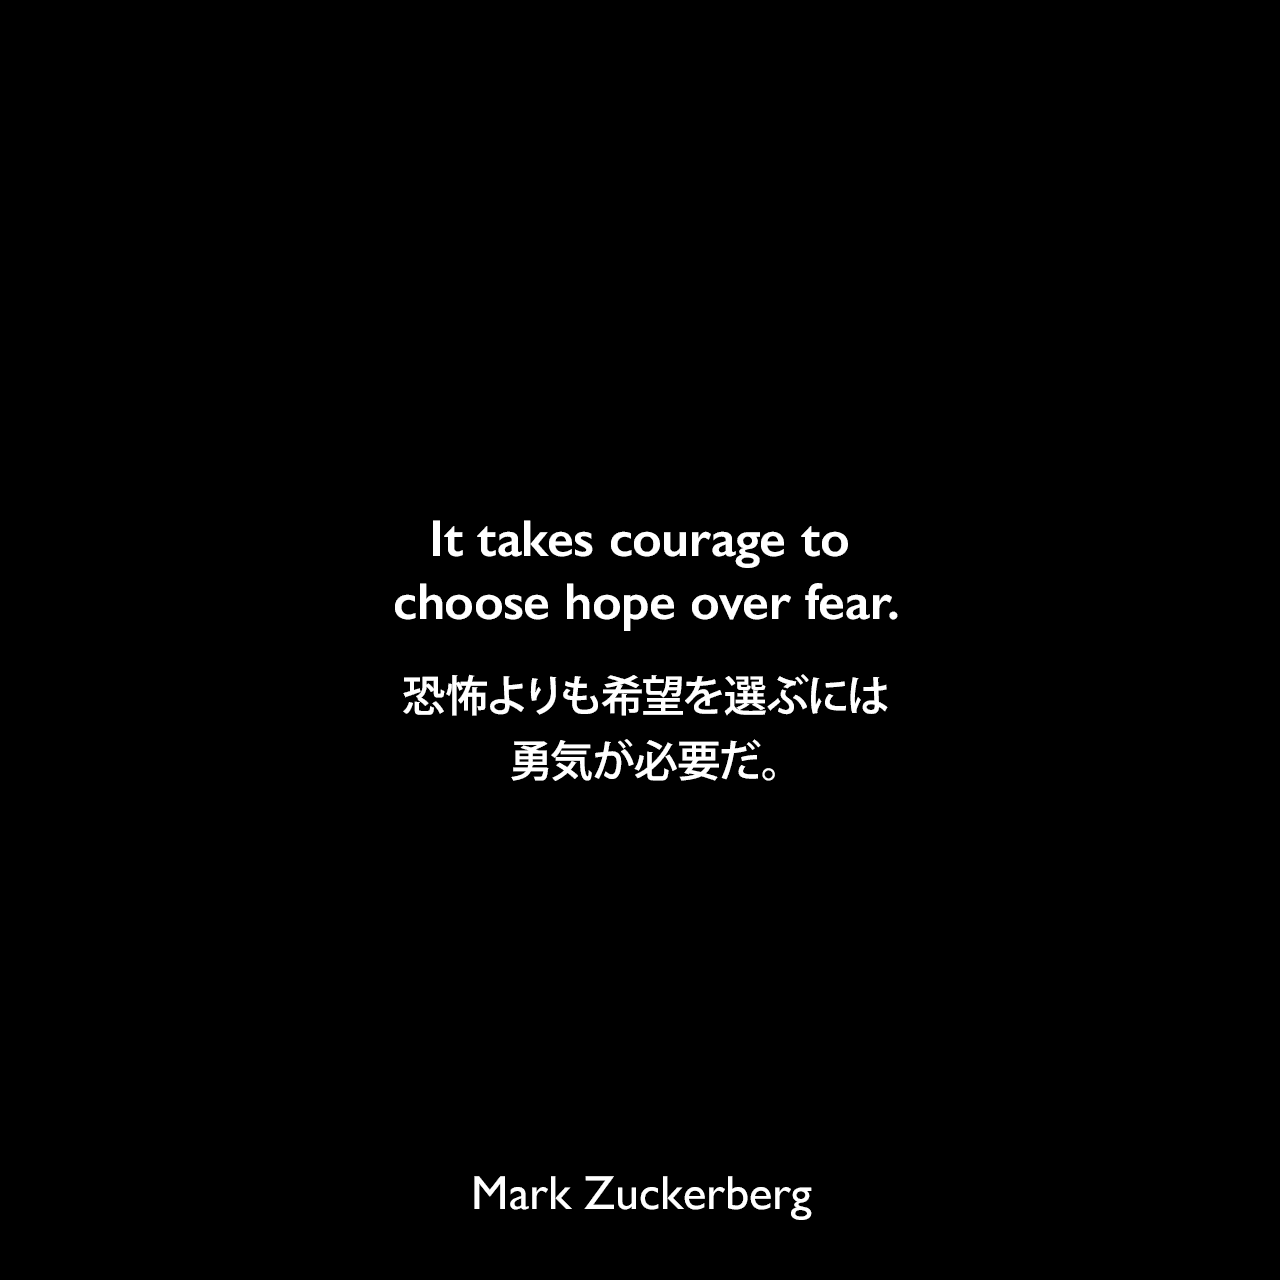 It takes courage to choose hope over fear.恐怖よりも希望を選ぶには勇気が必要だ。Mark Zuckerberg